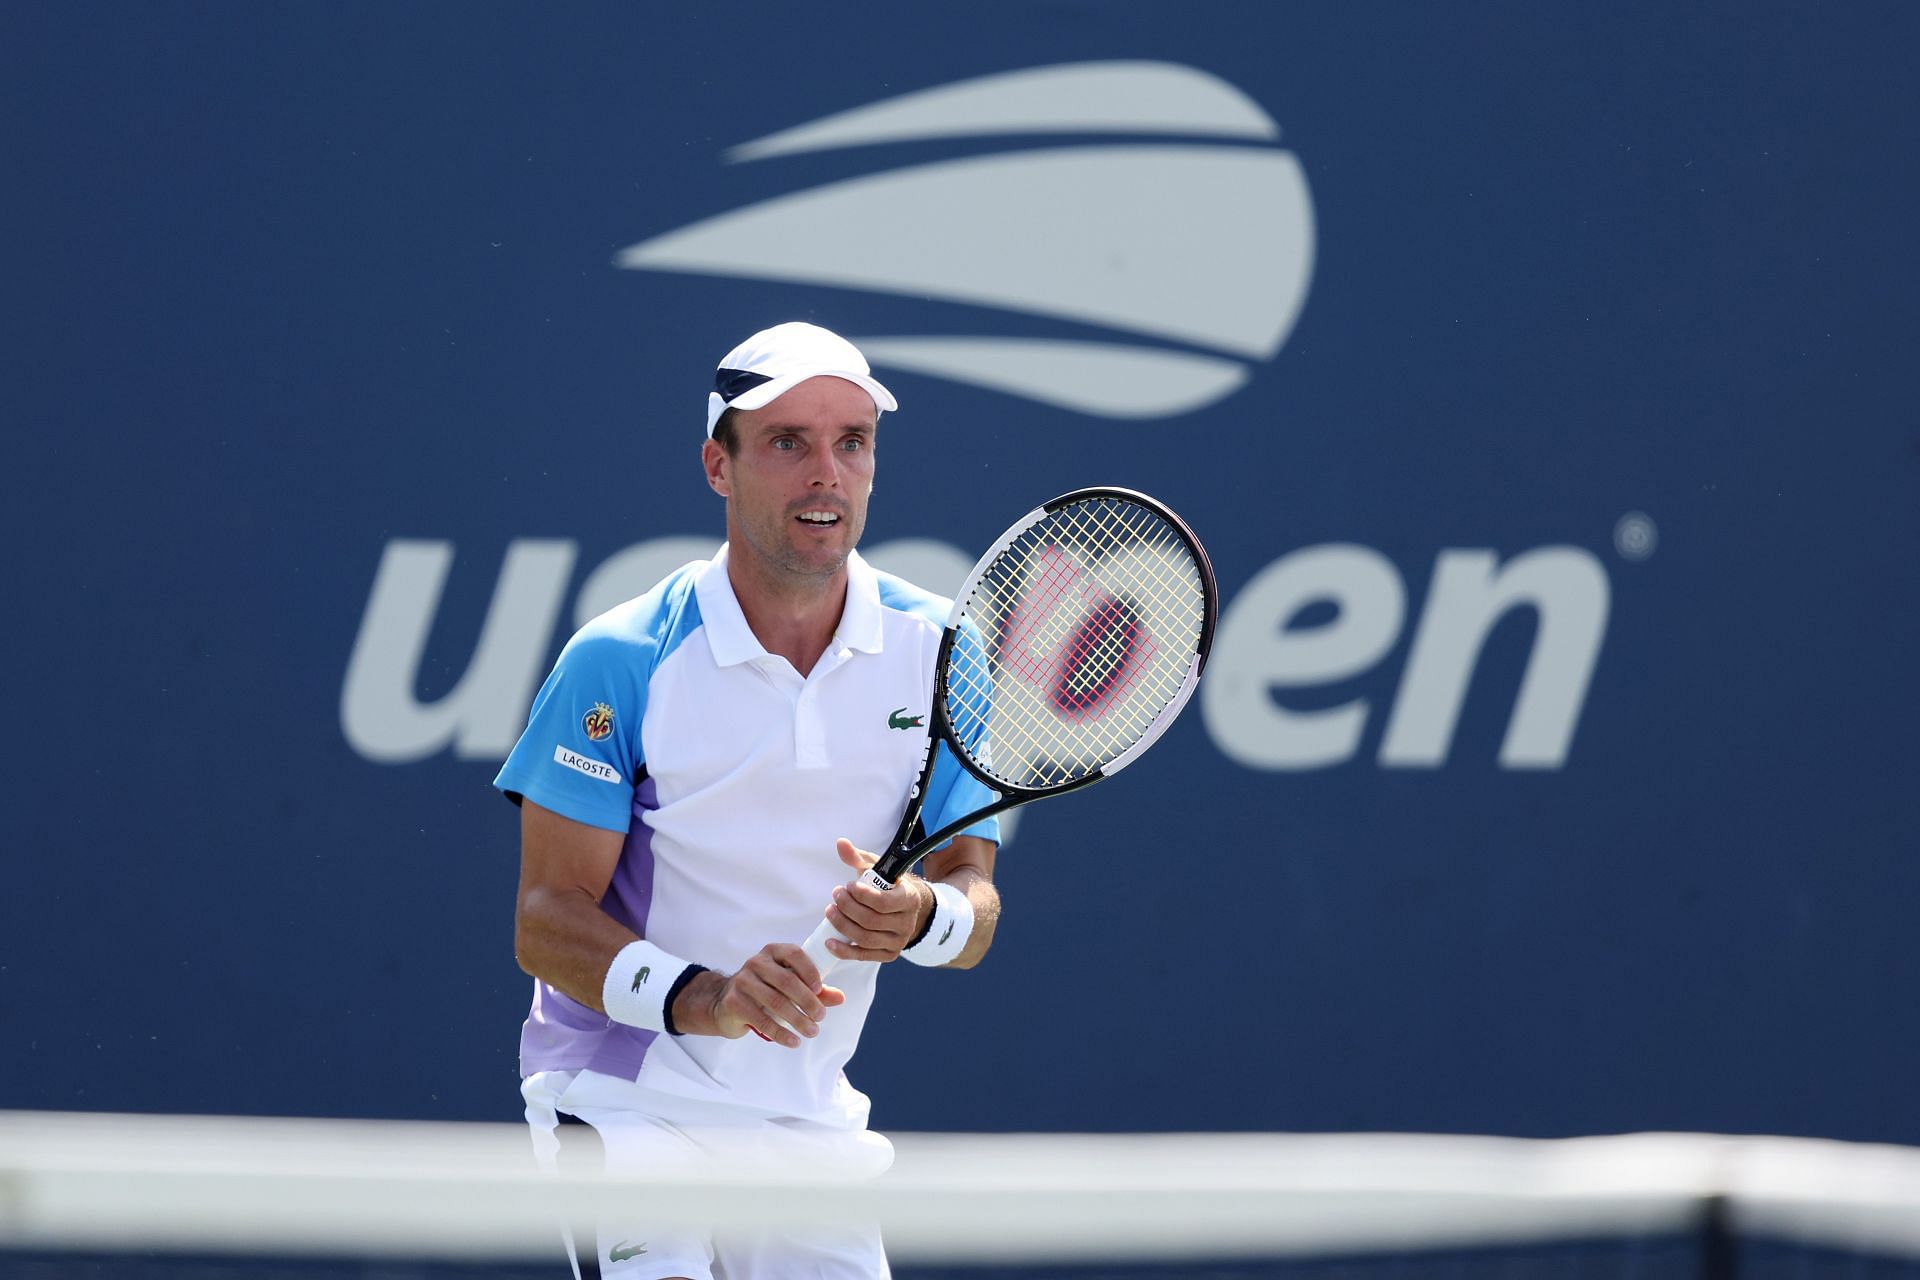 Roberto Bautista Agut bit the dust in the first round.